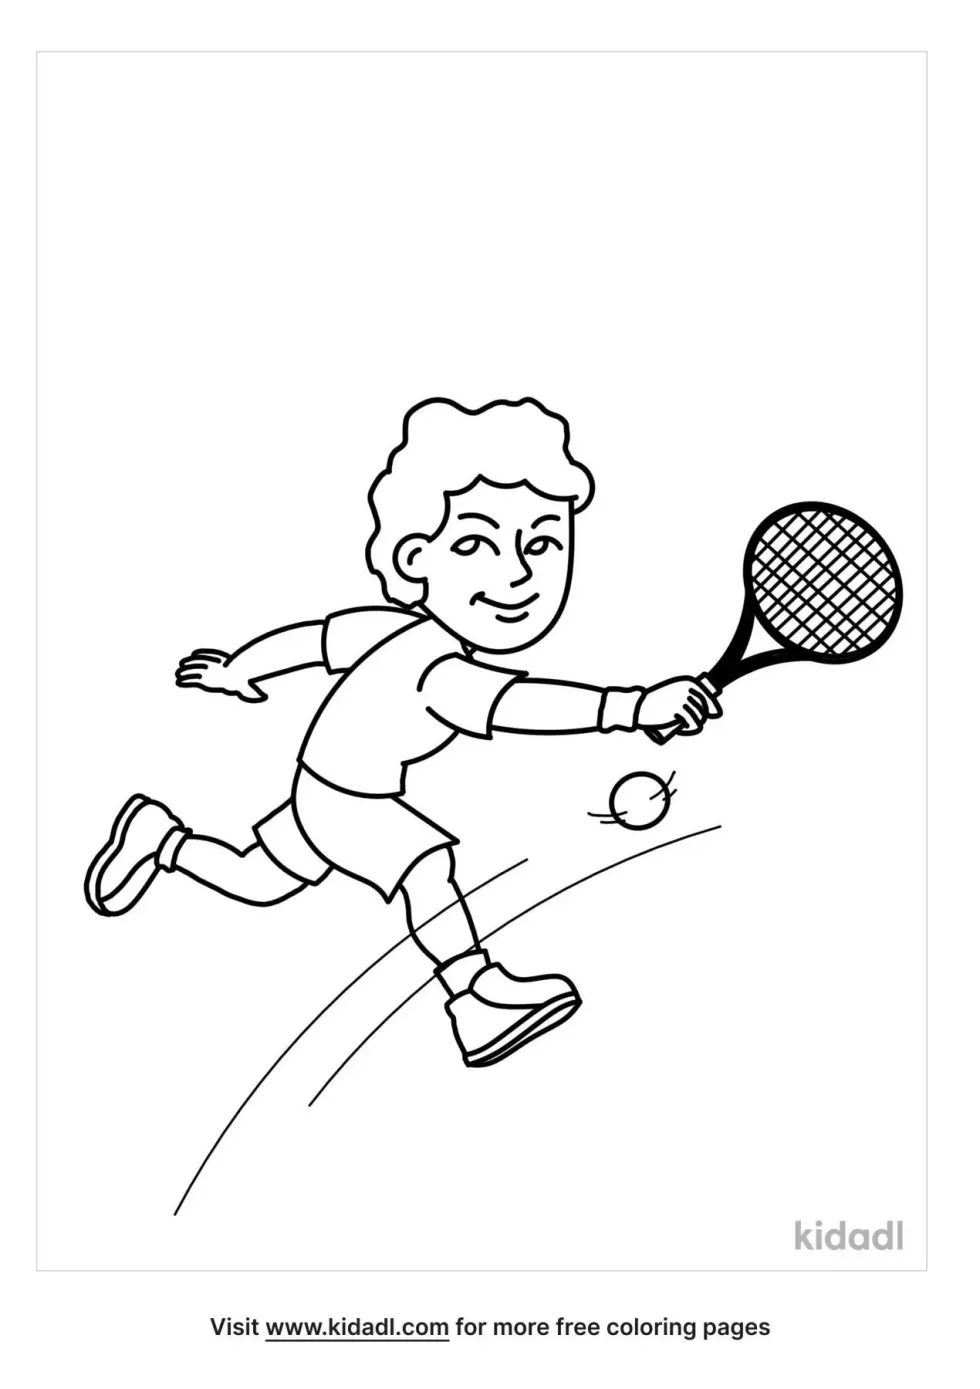 Tennis Backhand Coloring Page